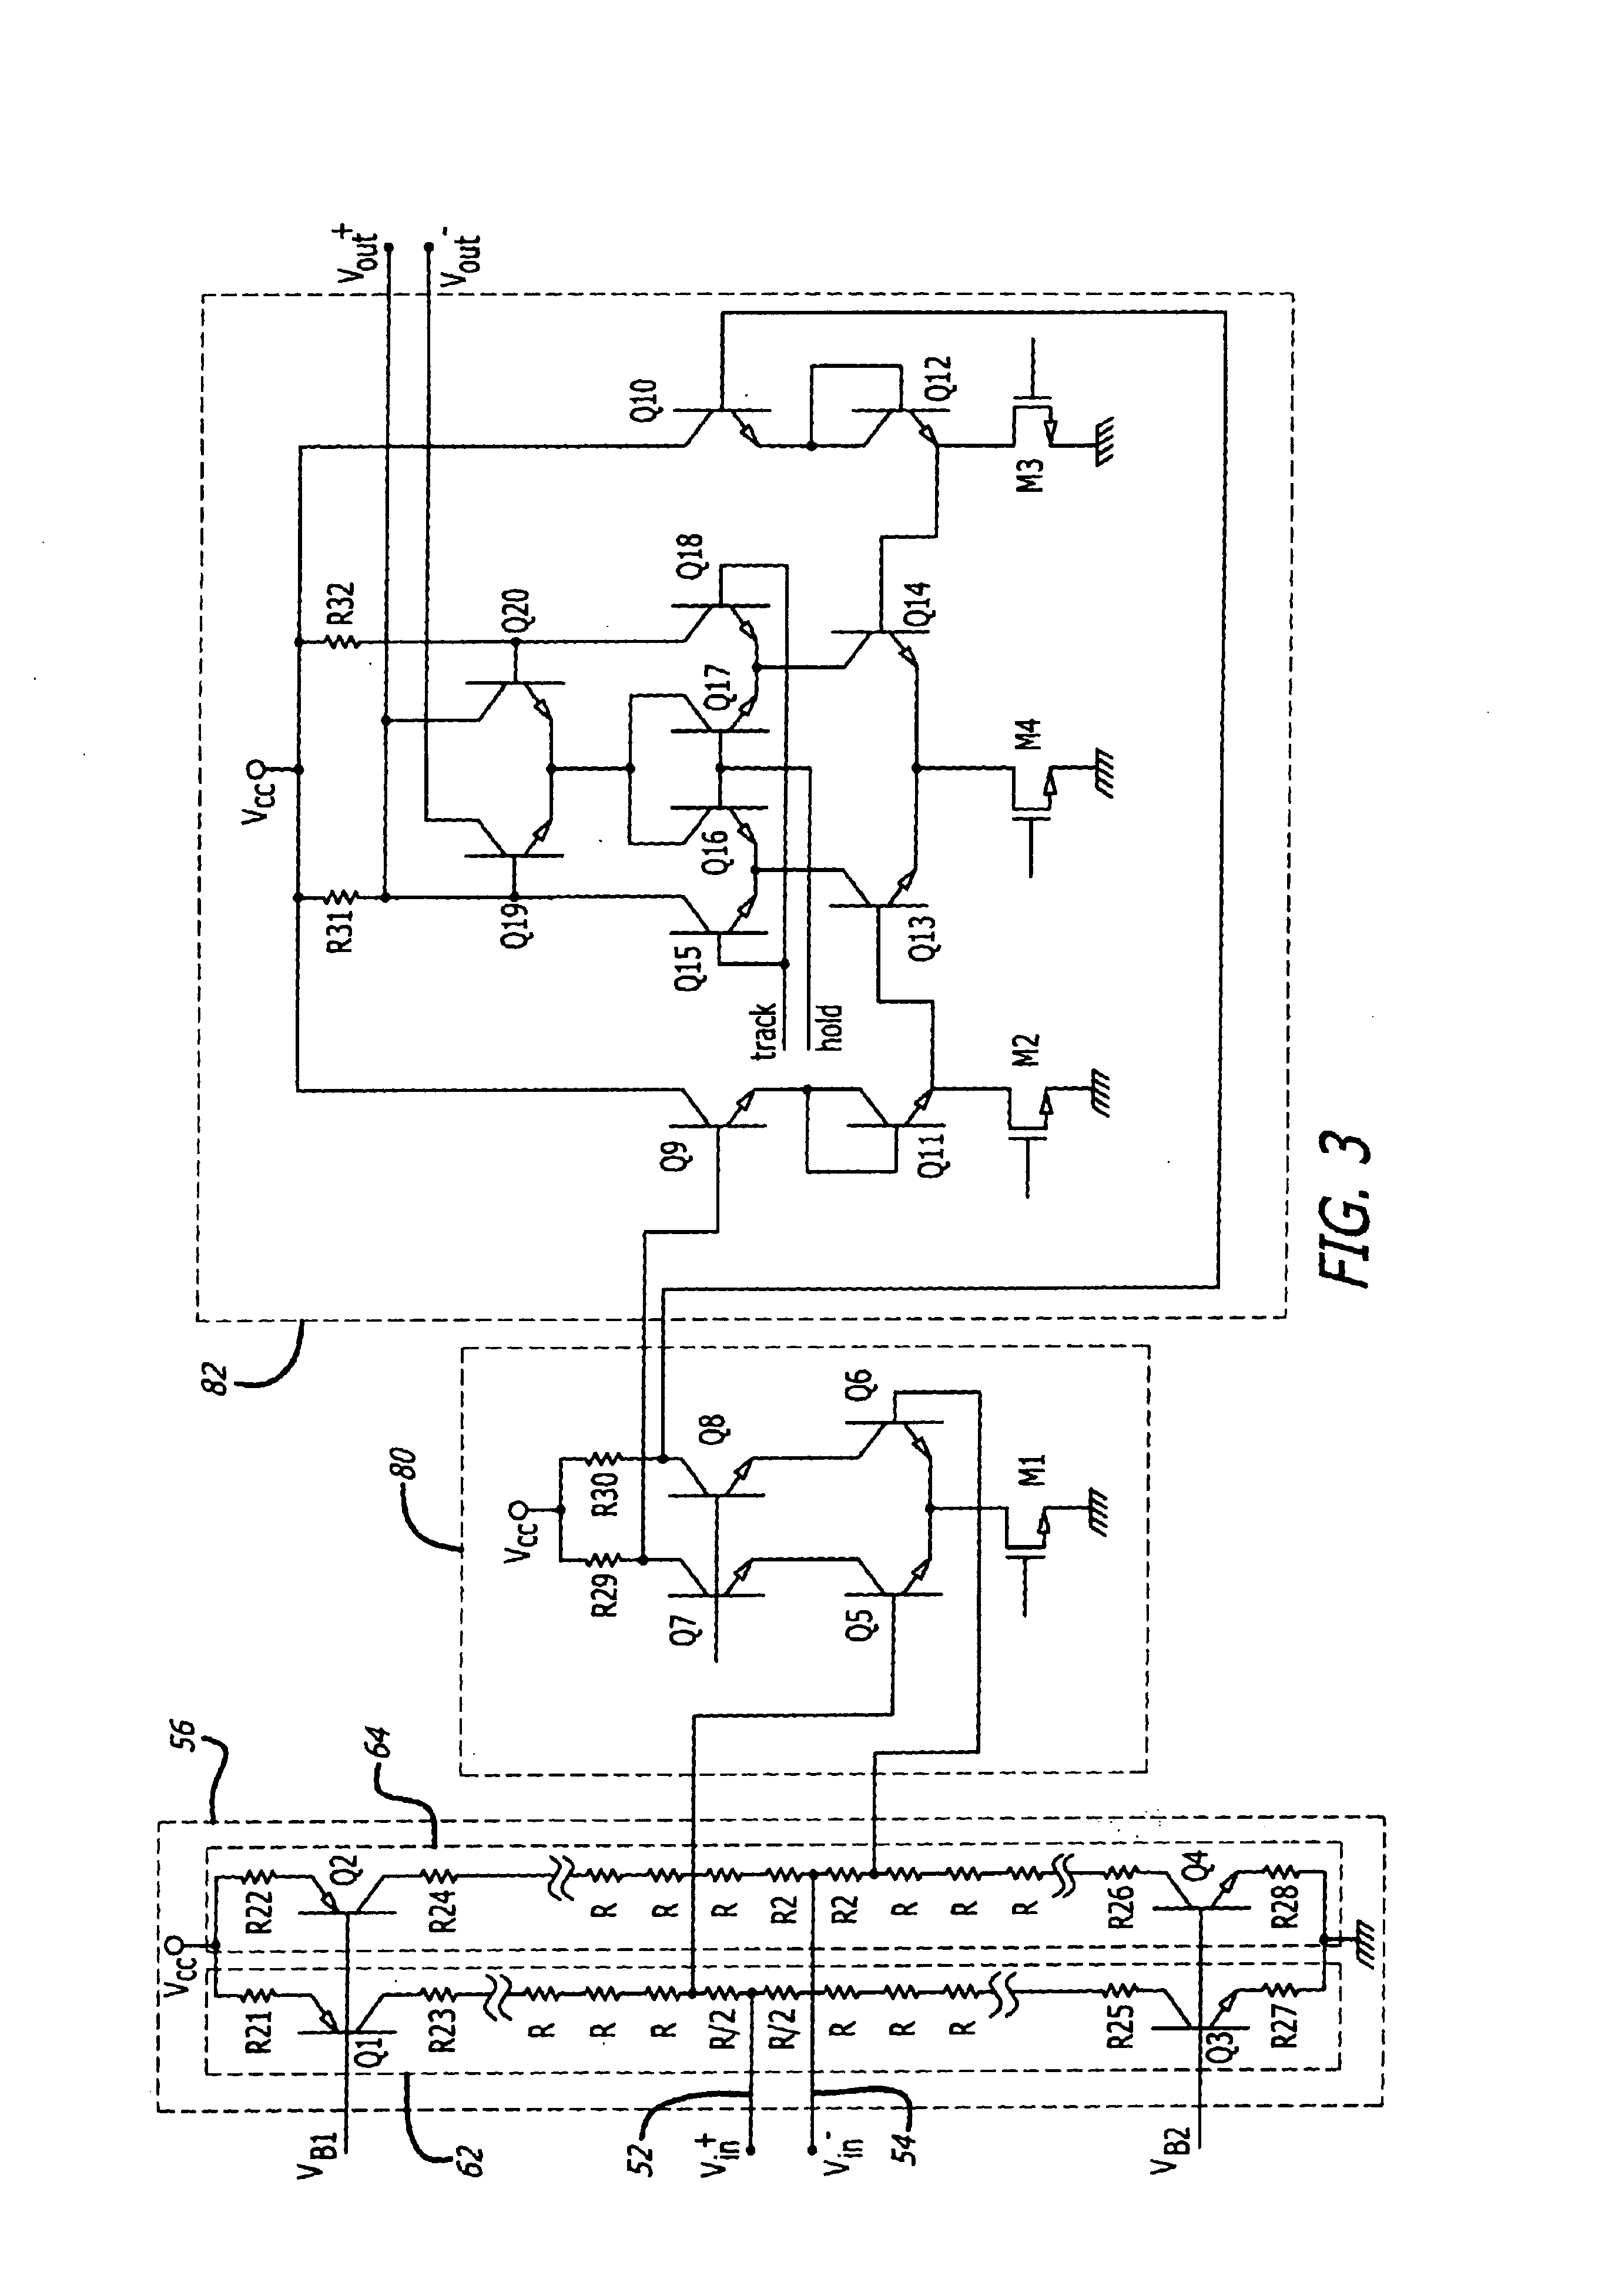 Resistive ladder, summing node circuit, and trimming method for a subranging analog to digital converter